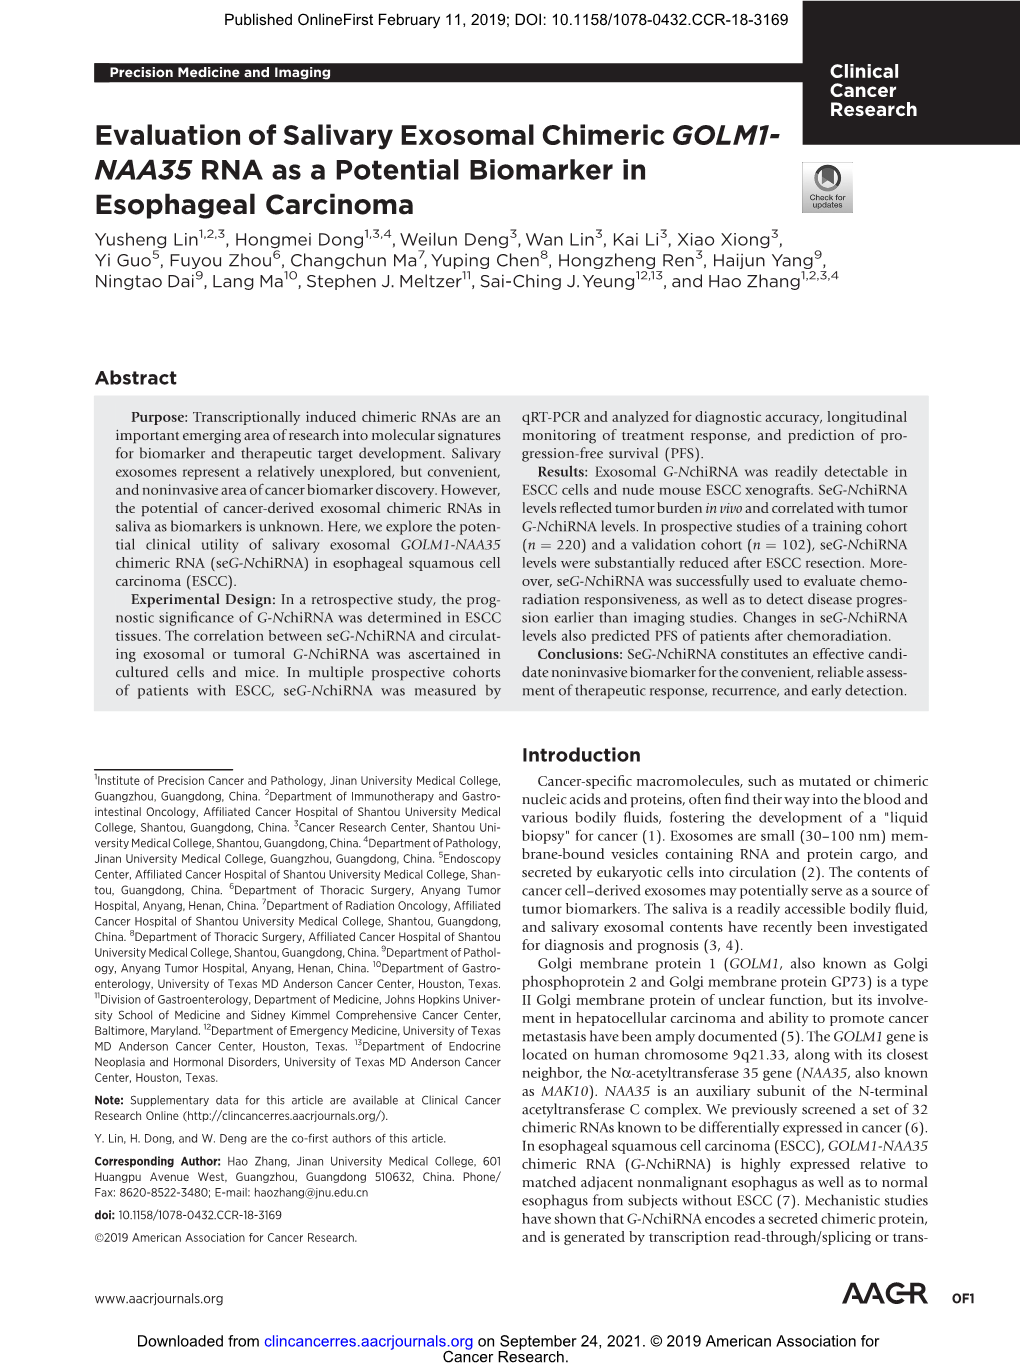 Evaluation of Salivary Exosomal Chimeric GOLM1-NAA35 RNA As a Potential Biomarker in Esophageal Carcinoma